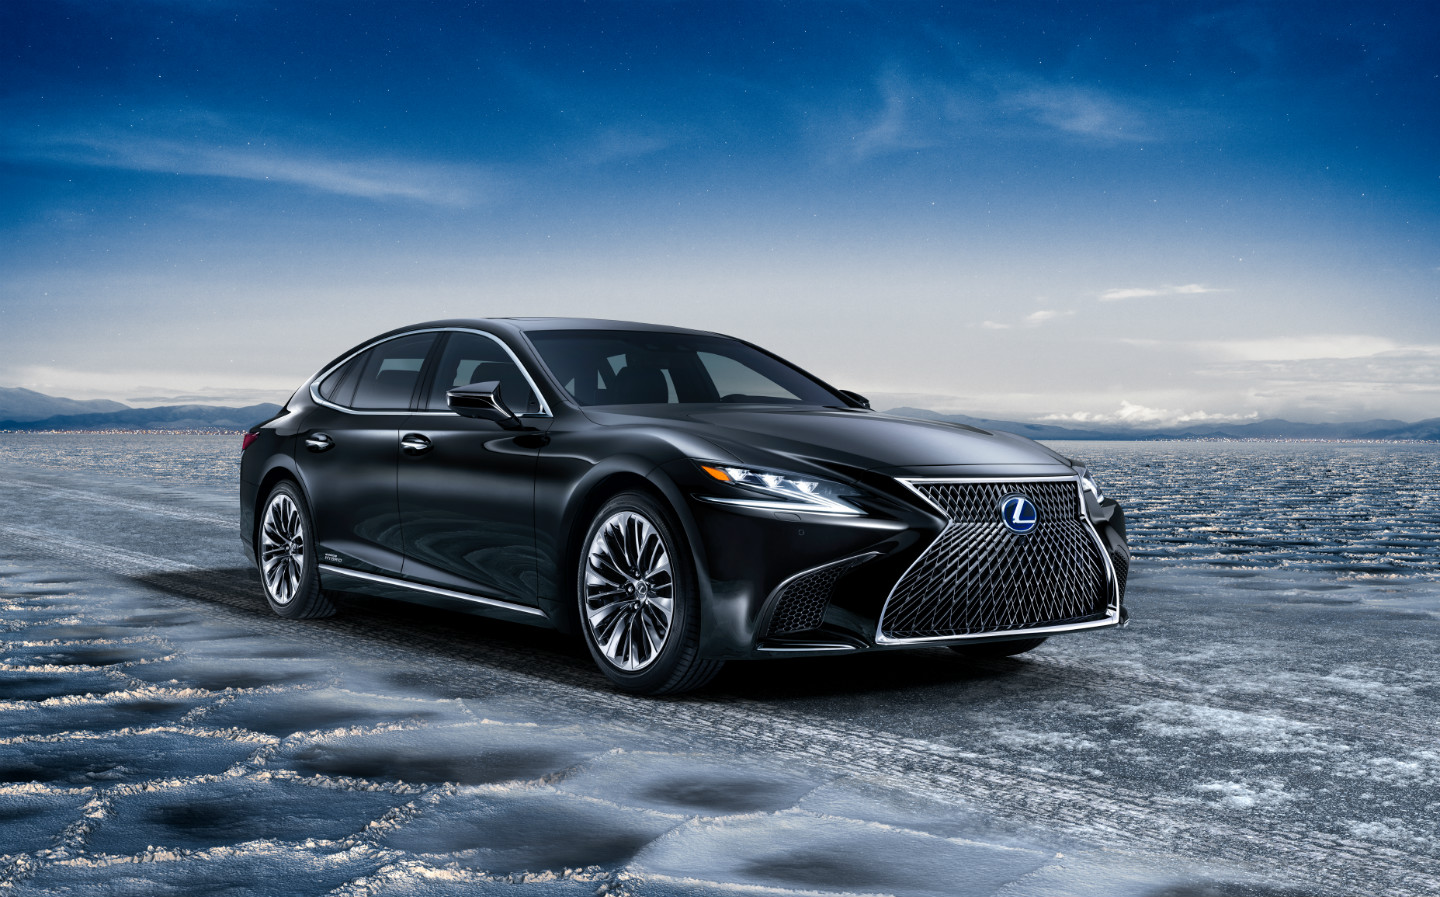 The best eco-friendly hybrid luxury and sports cars: 2018 Lexus LS500h